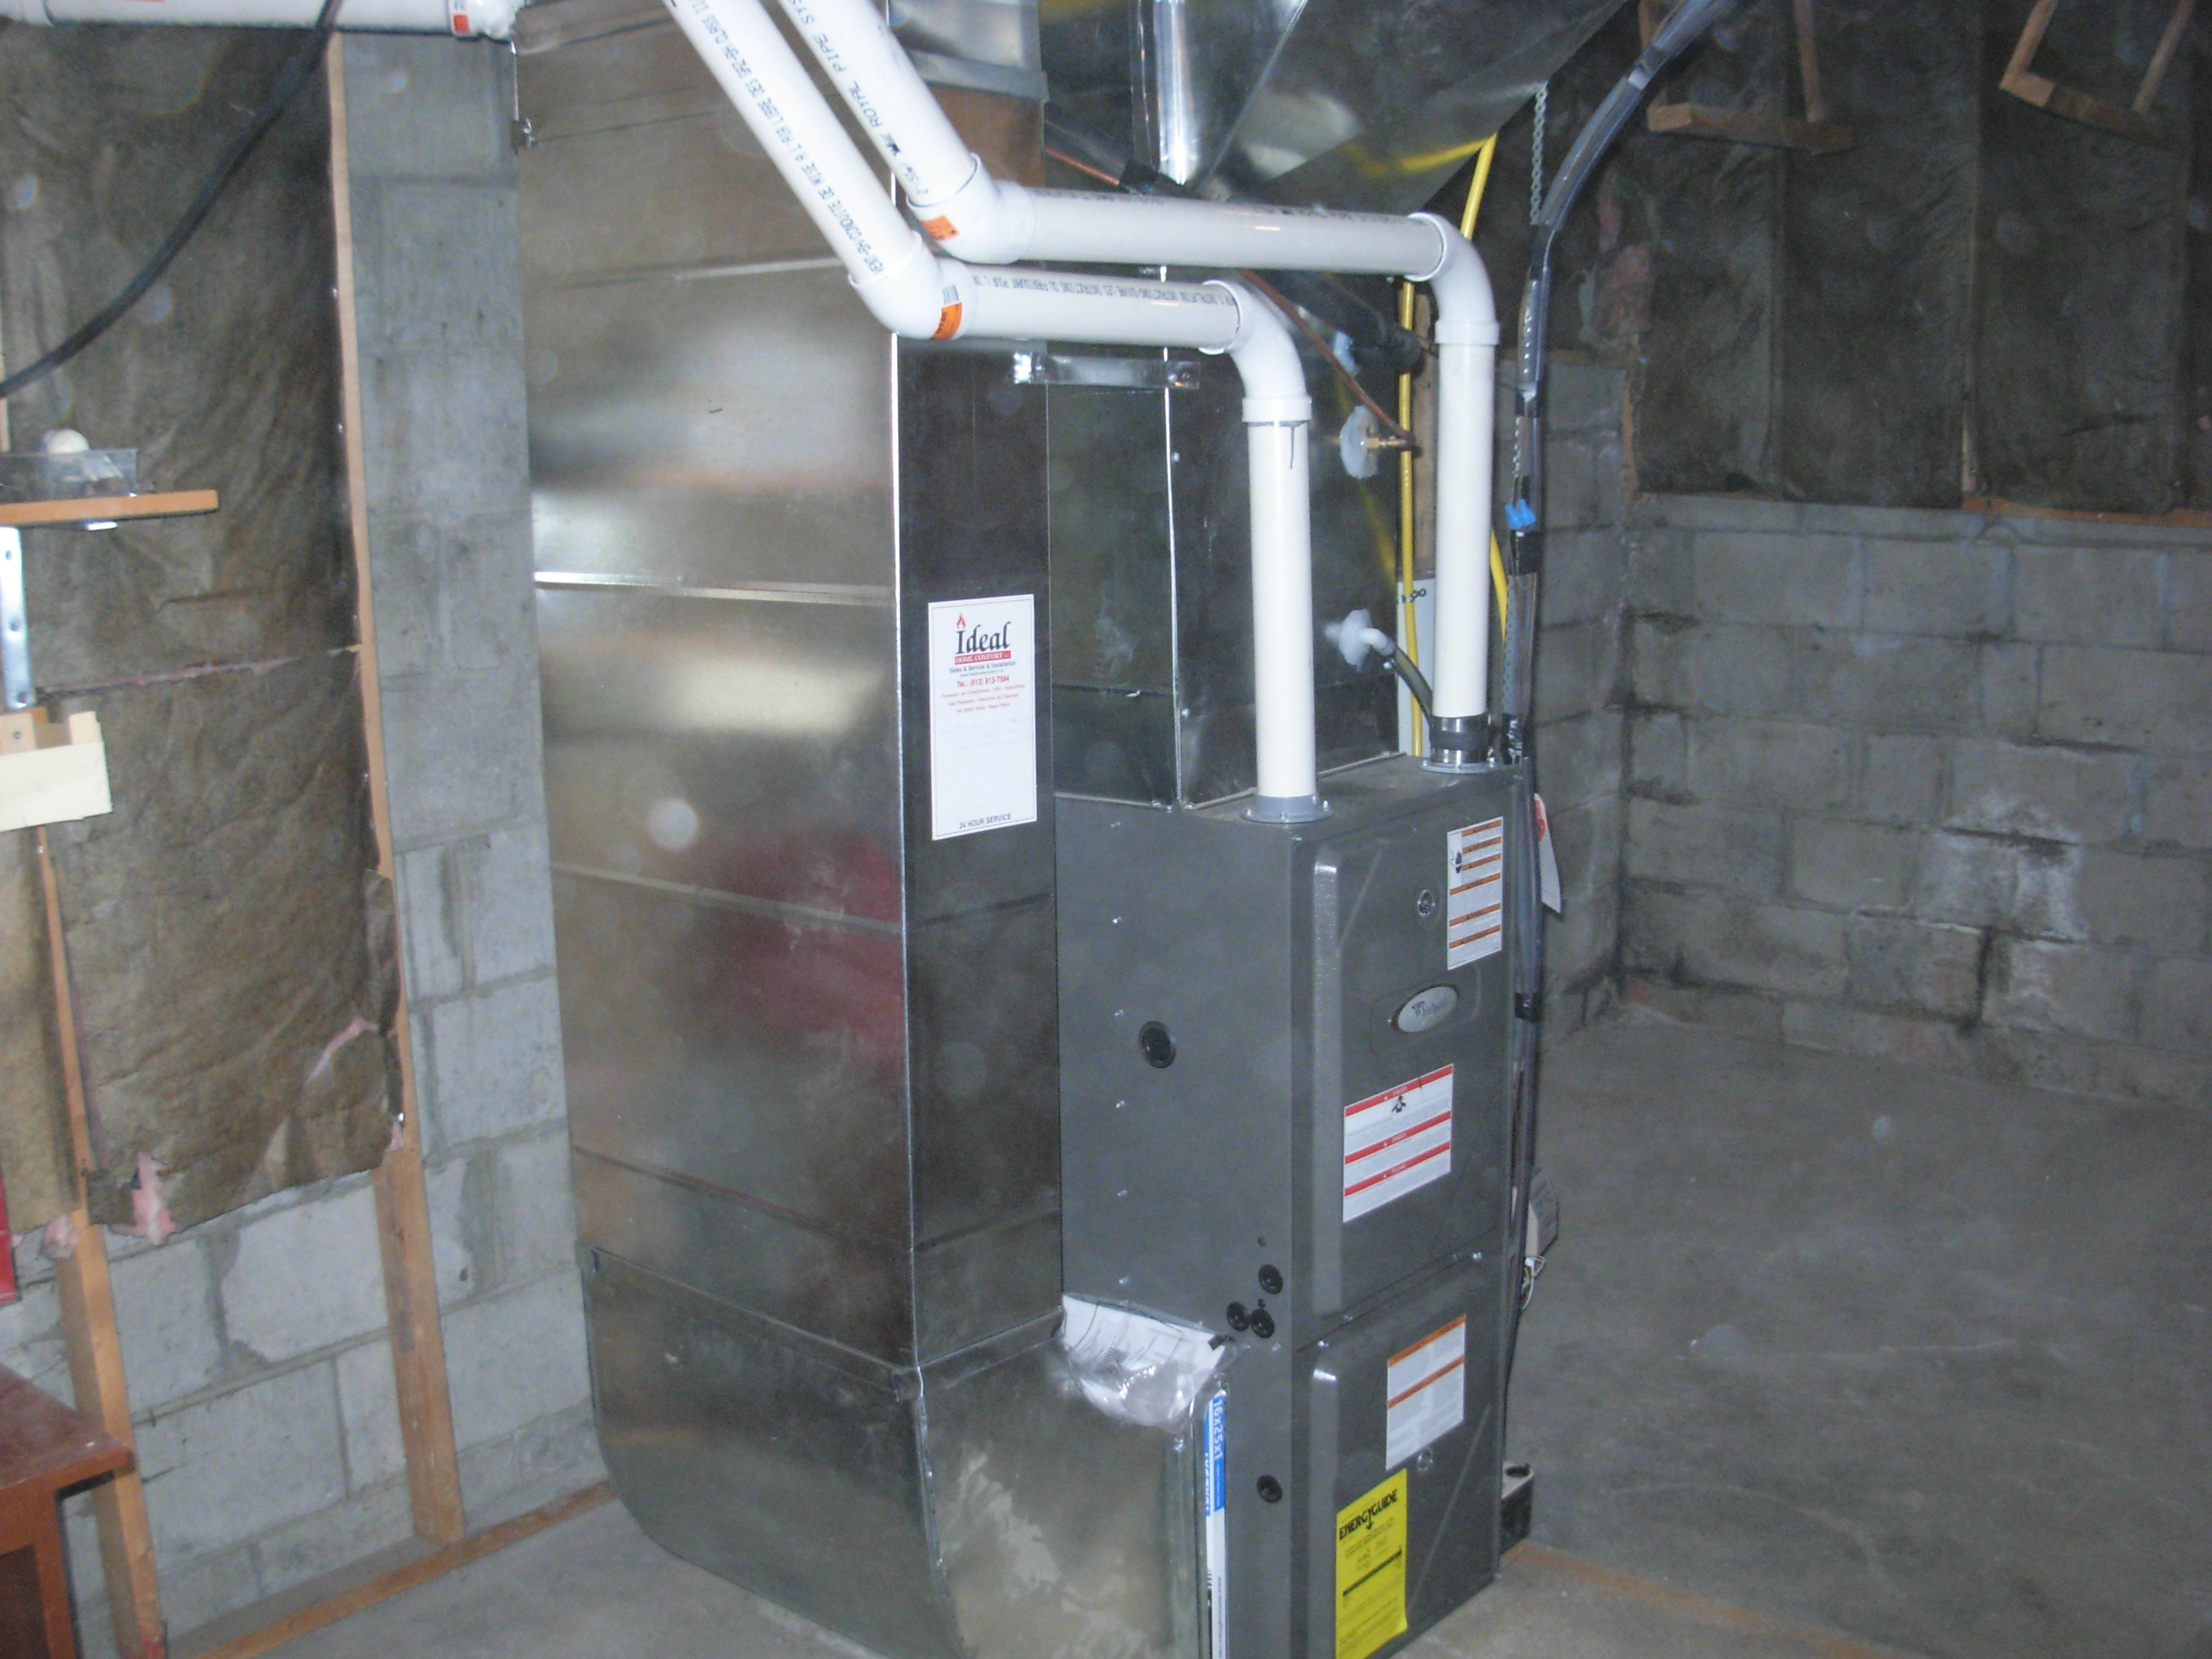 oil-furnace-removed-and-new-gas-furnace-re-located-ideal-home-comfort